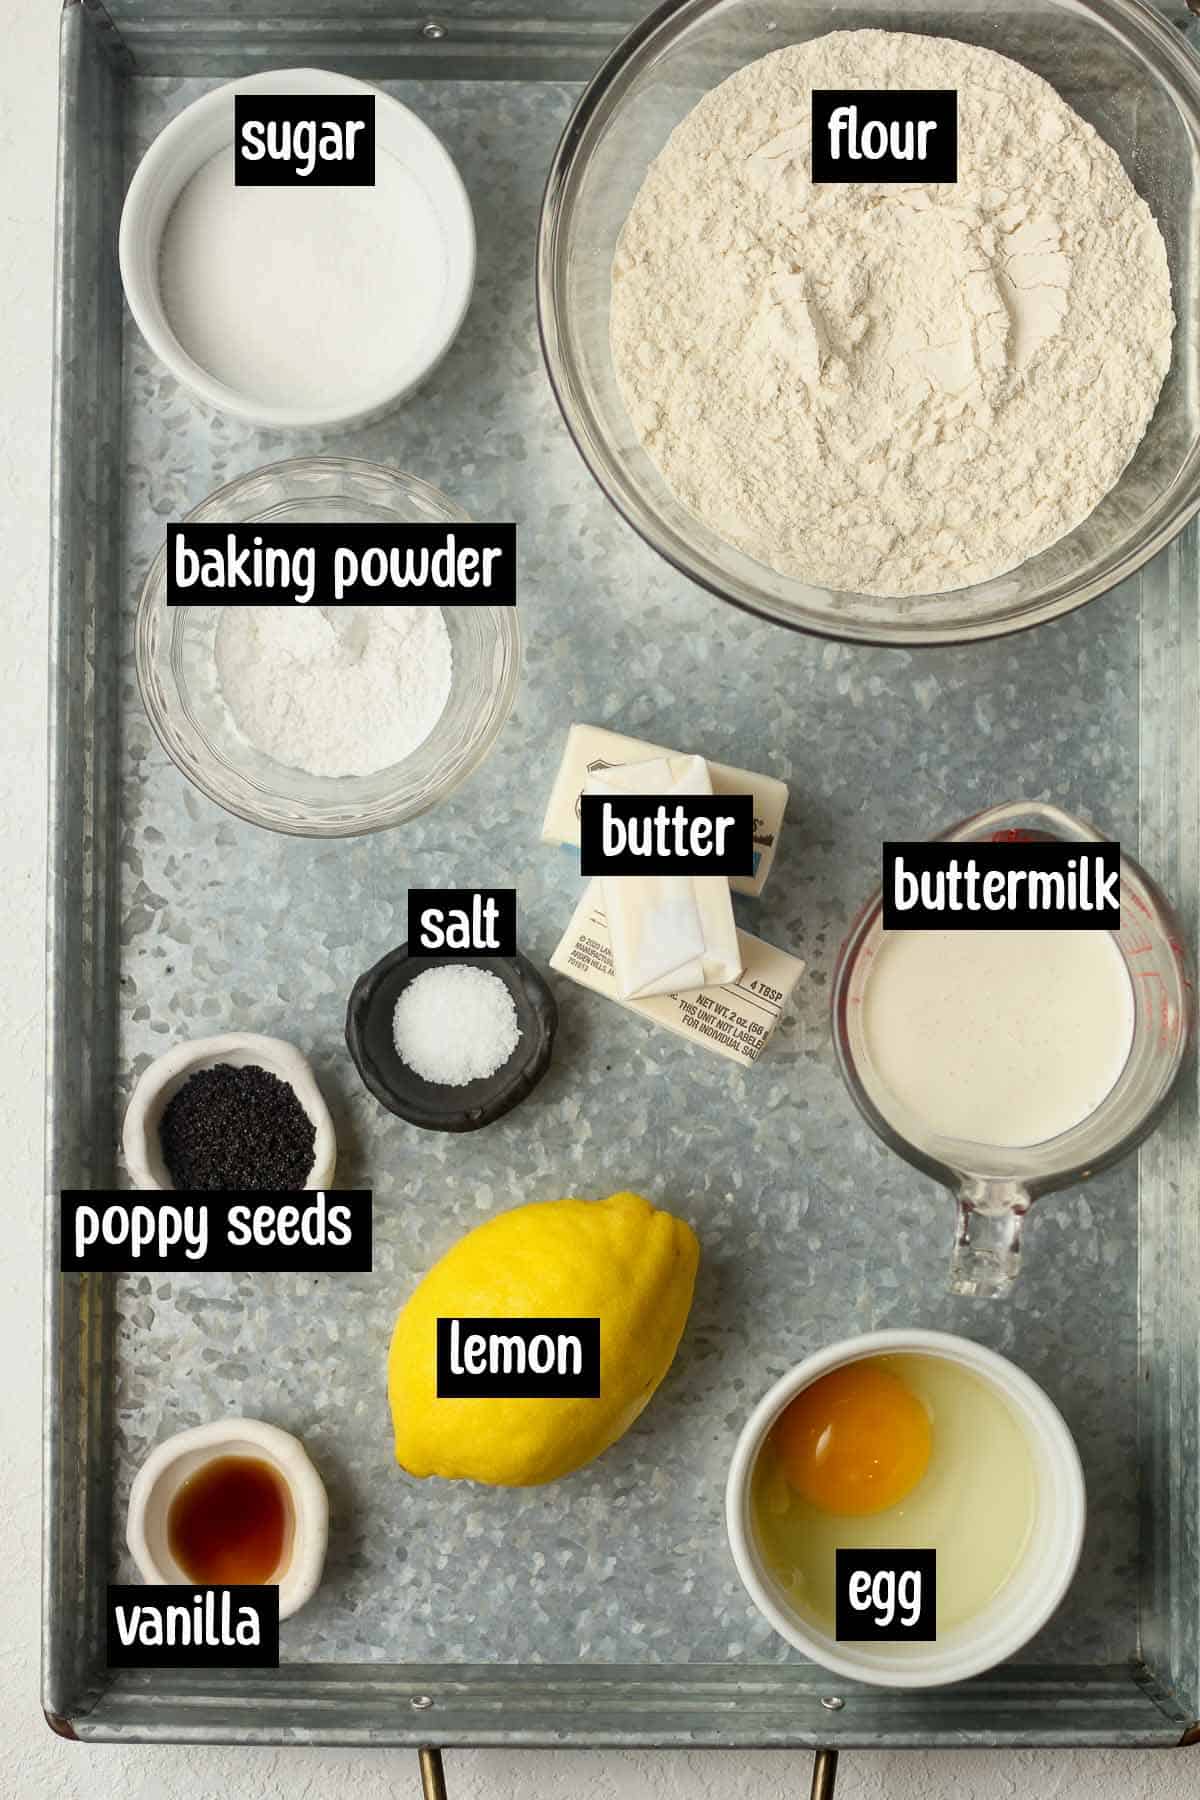 The ingredients (labeled) for the lemon scones.